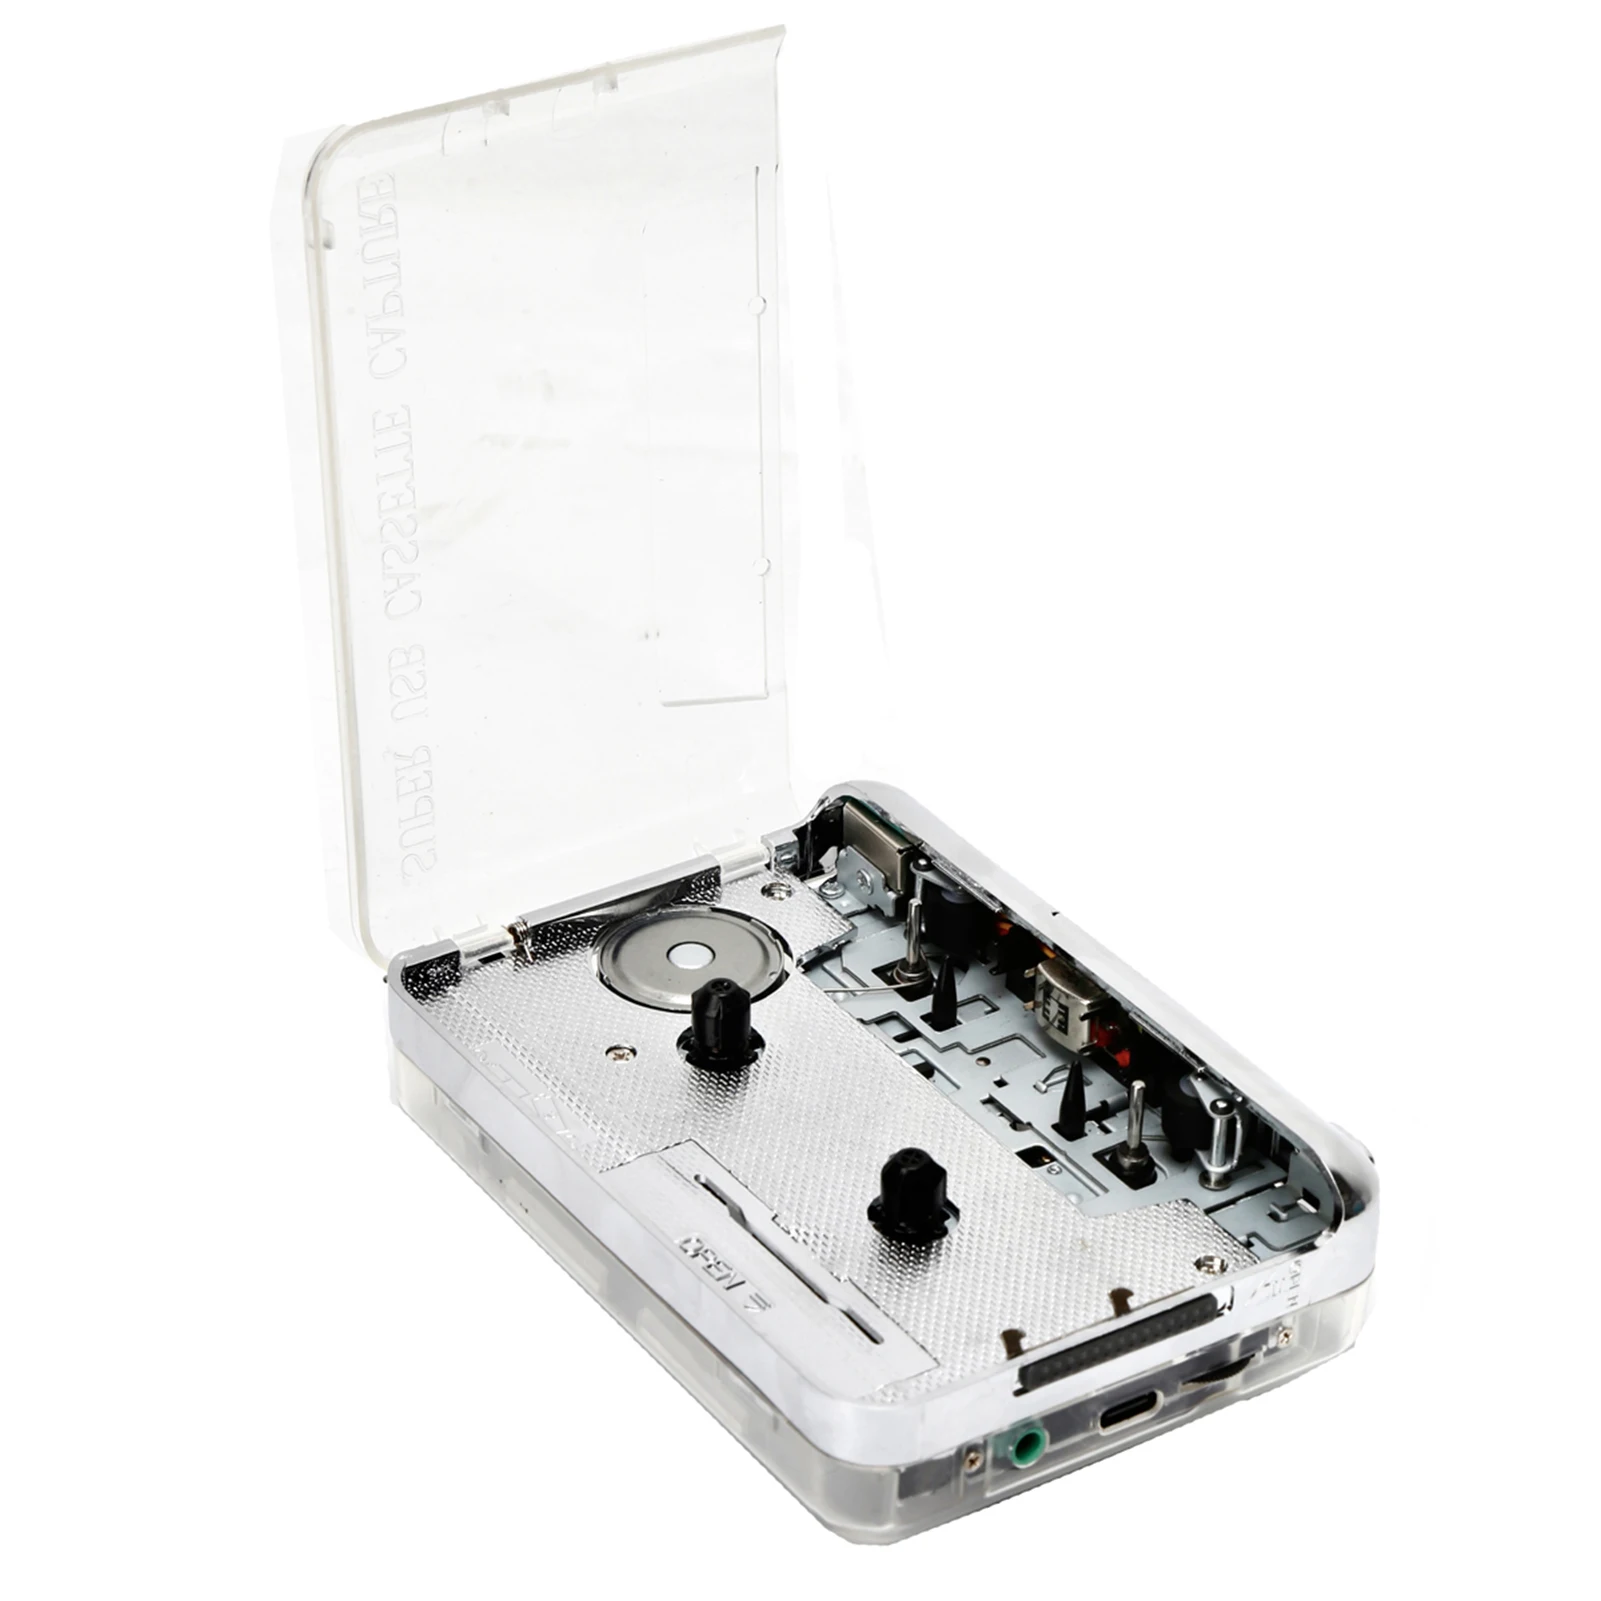 TON010 Cassette Player Portable Tape Recorder To Mp3 Full Transparent Shell USB Cassette Capture To MP3 Format Tape Music Player